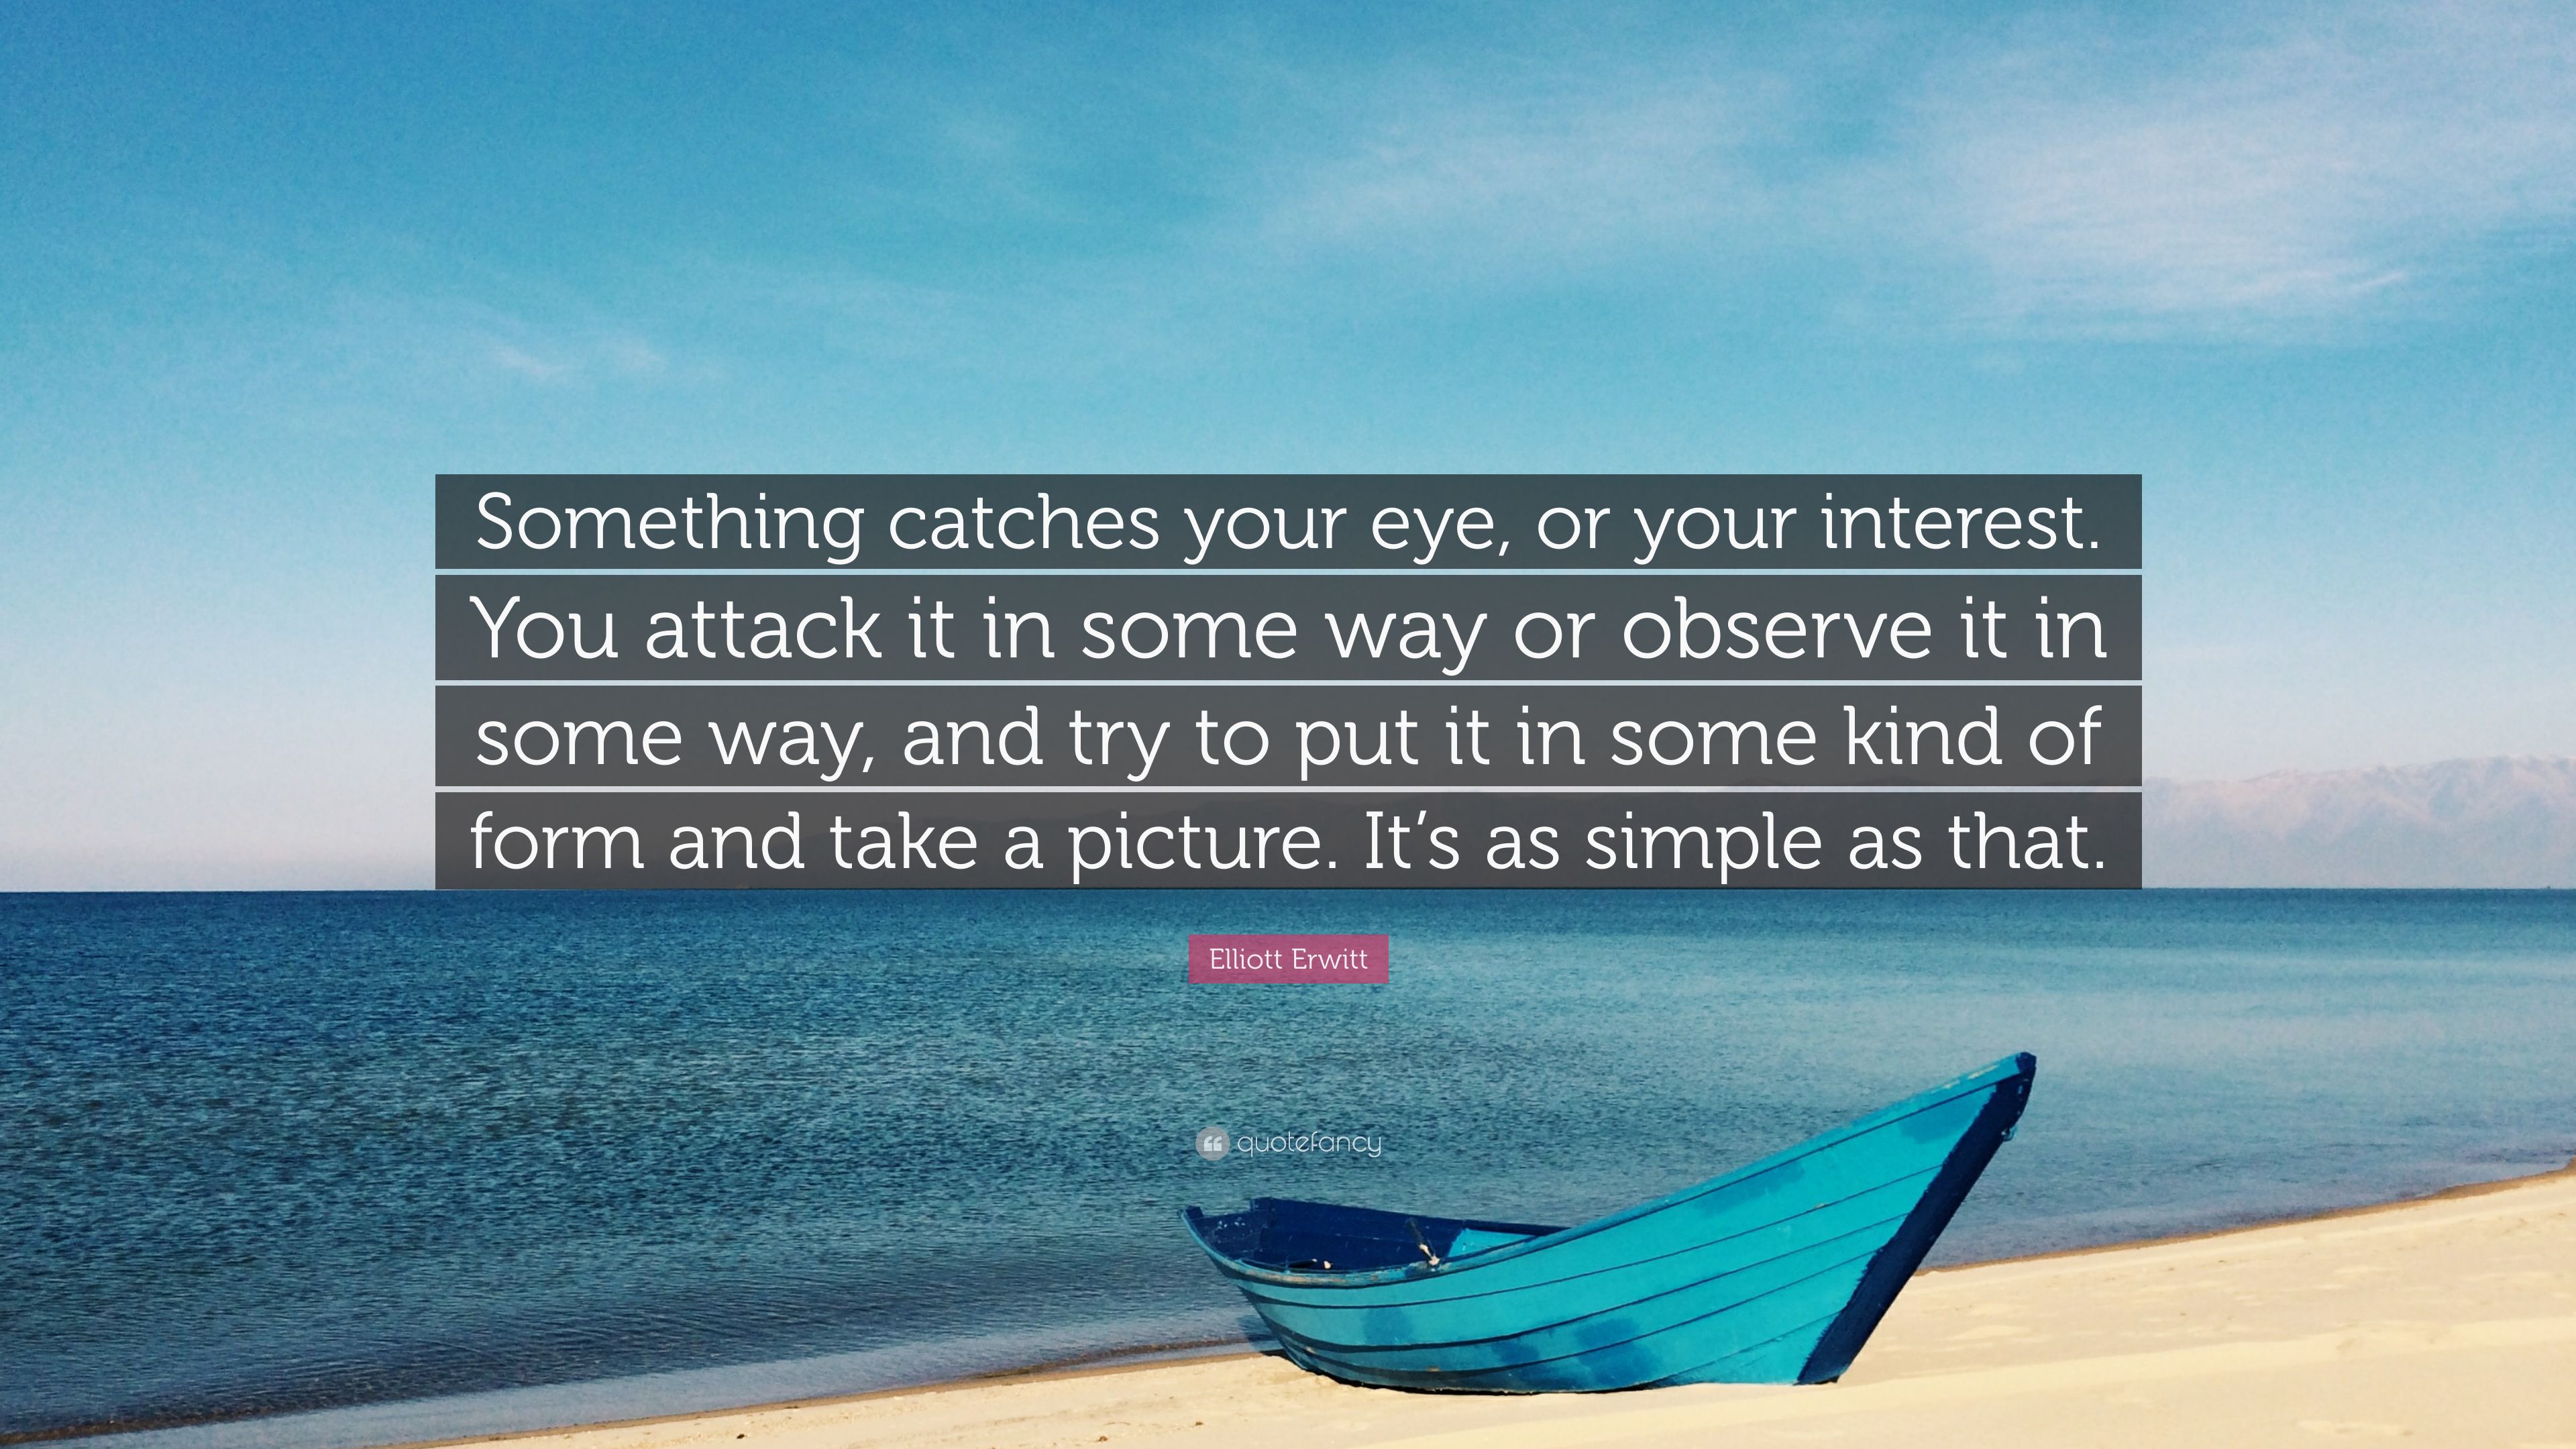 Elliott Erwitt Quote: “Something catches your eye, or your interest ...